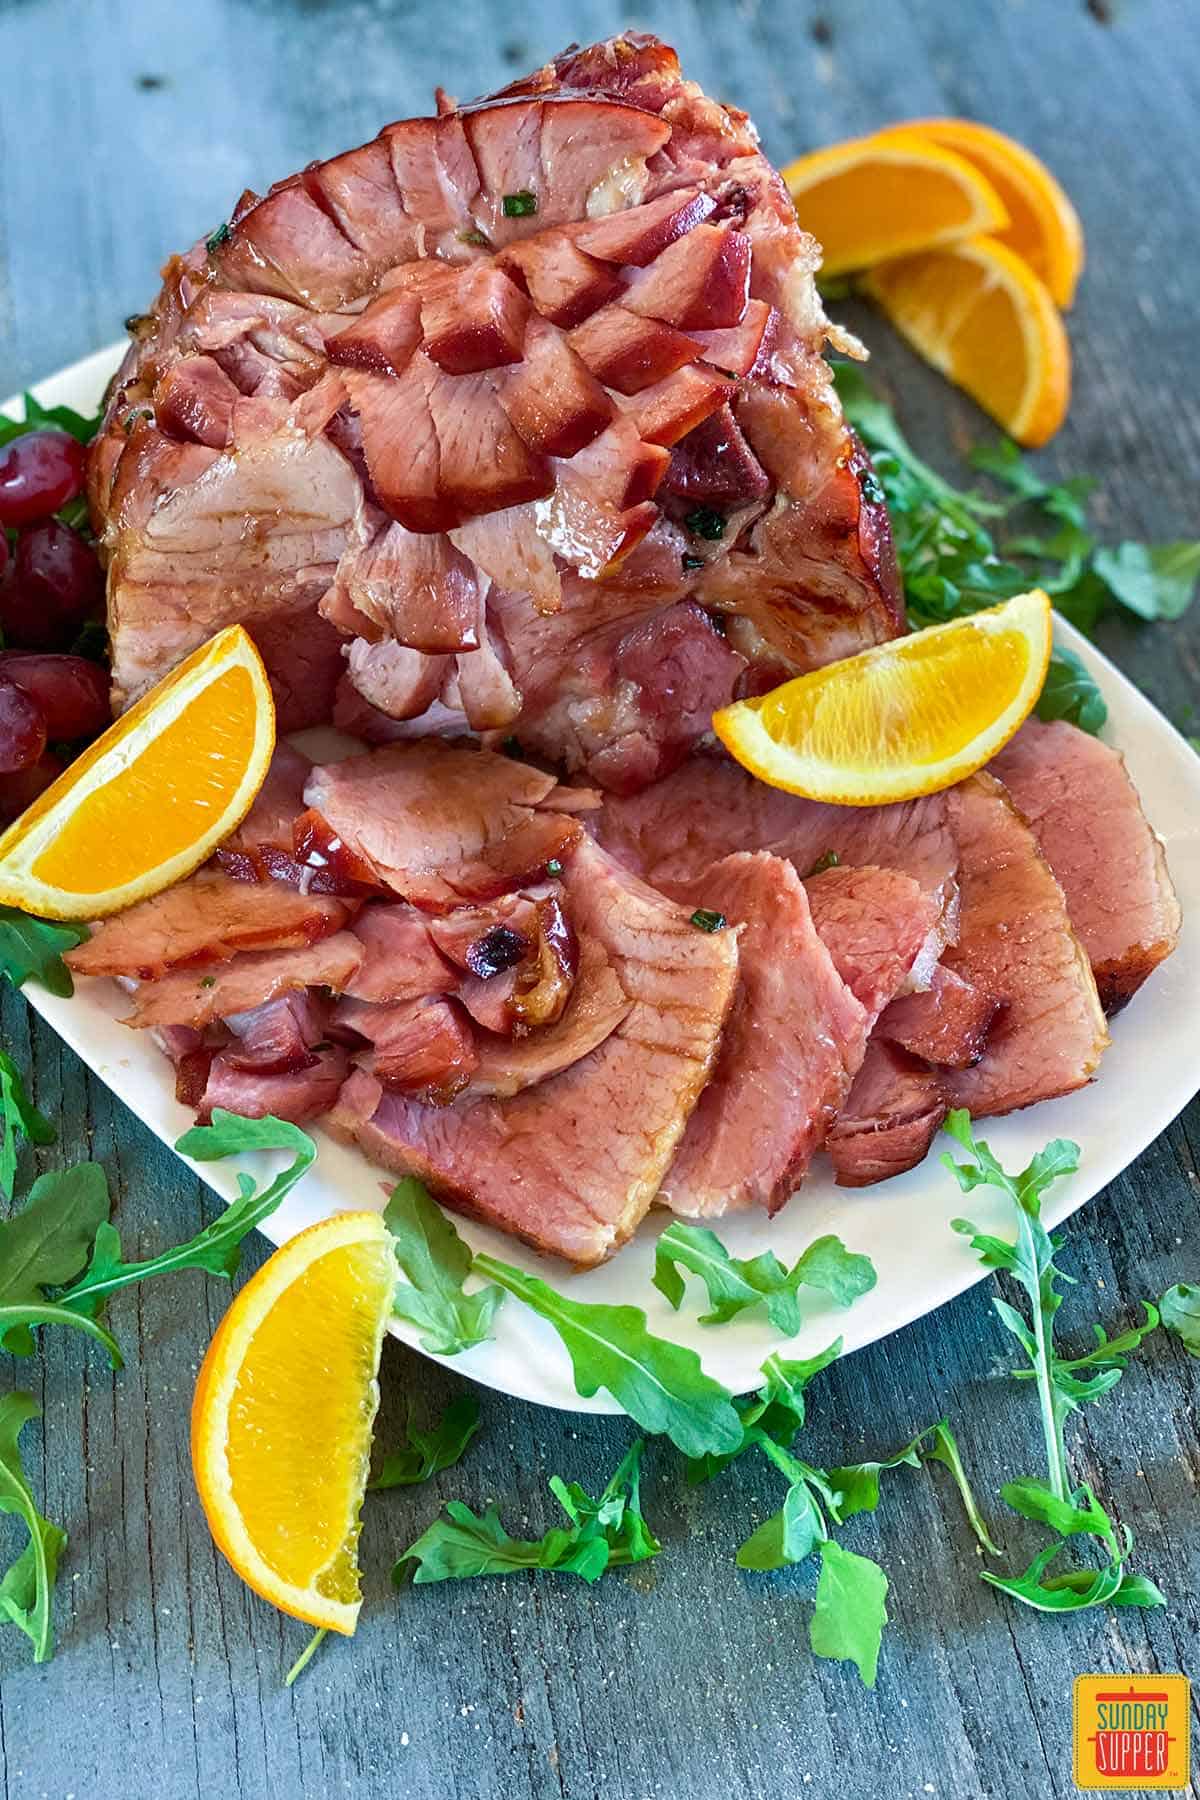 Instant pot ham with slices of orange and arugula on a platter